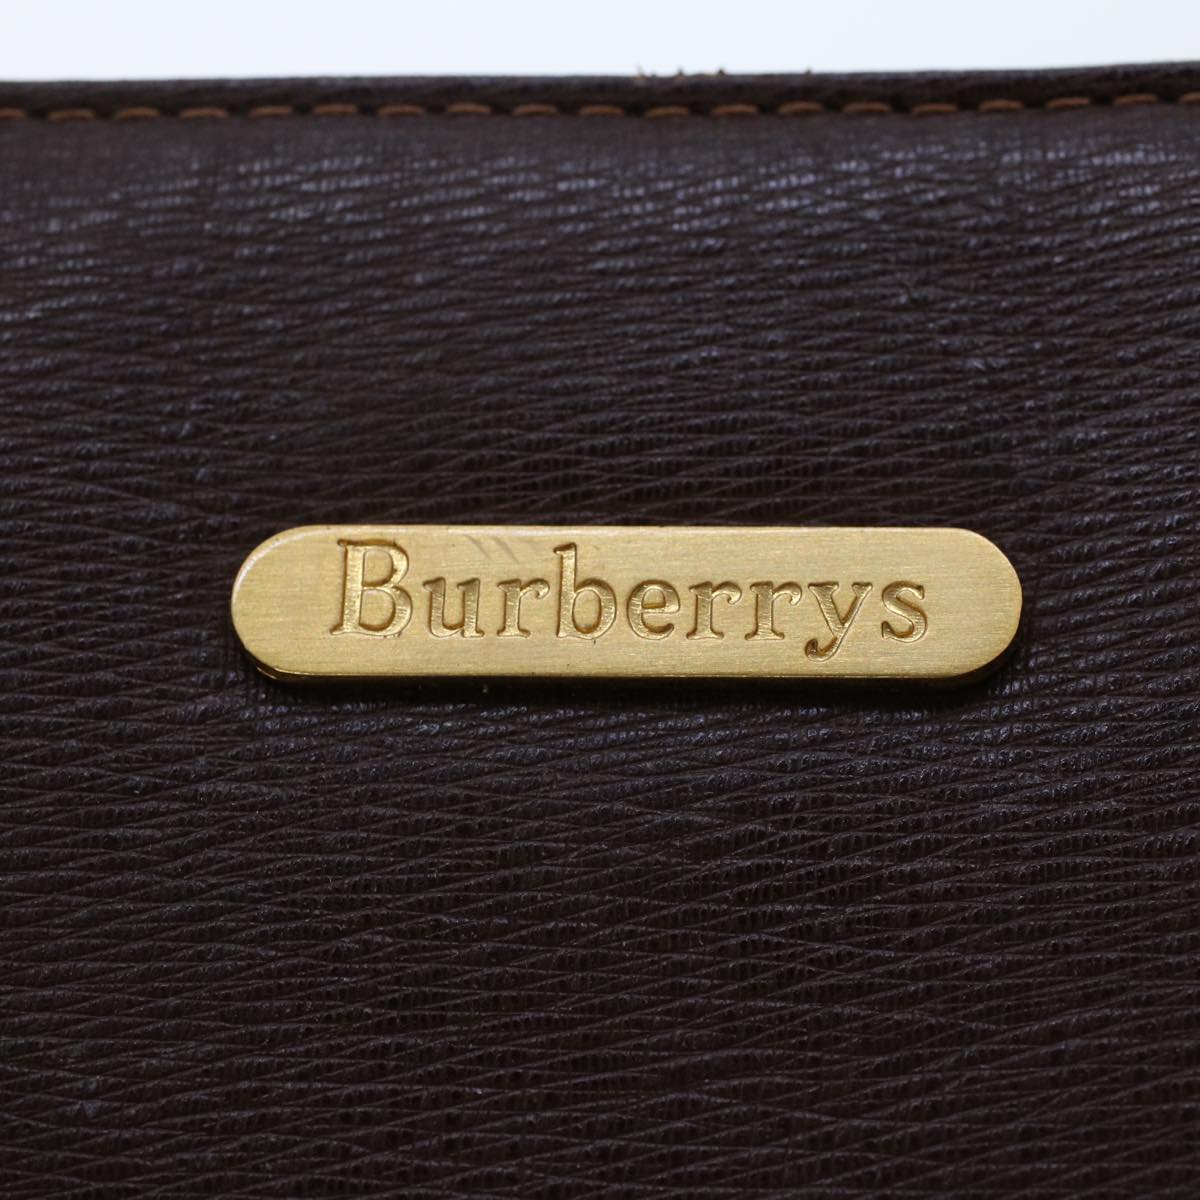 Burberrys Hand Bag Leather Brown Auth bs6515